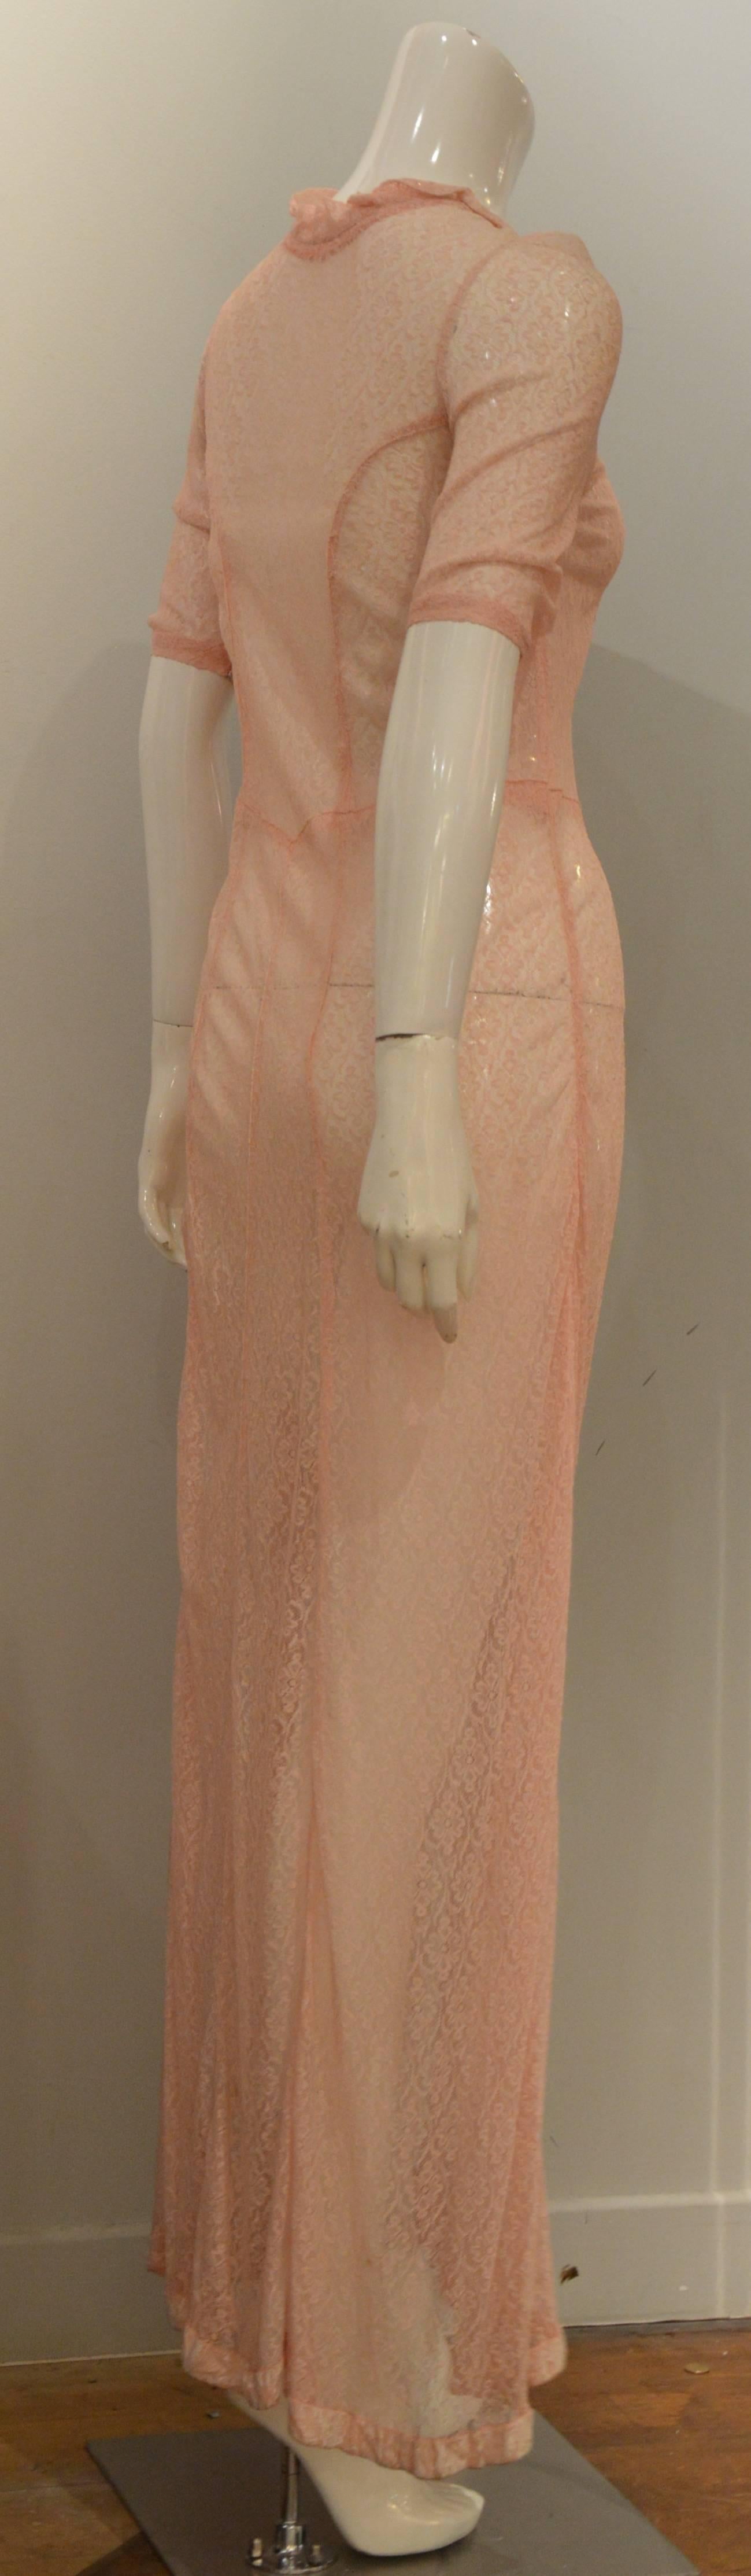 Very modern 1920s lovely and cool lace see through dress. Very good condition but still few holes need to be repaired. Exceptional soft pink color and quite stretchy fabric.
Measurements :
Shoulders : 38-40 cm
Bust : 72 cm - 76 cm
Waist ; 76 cm - 80